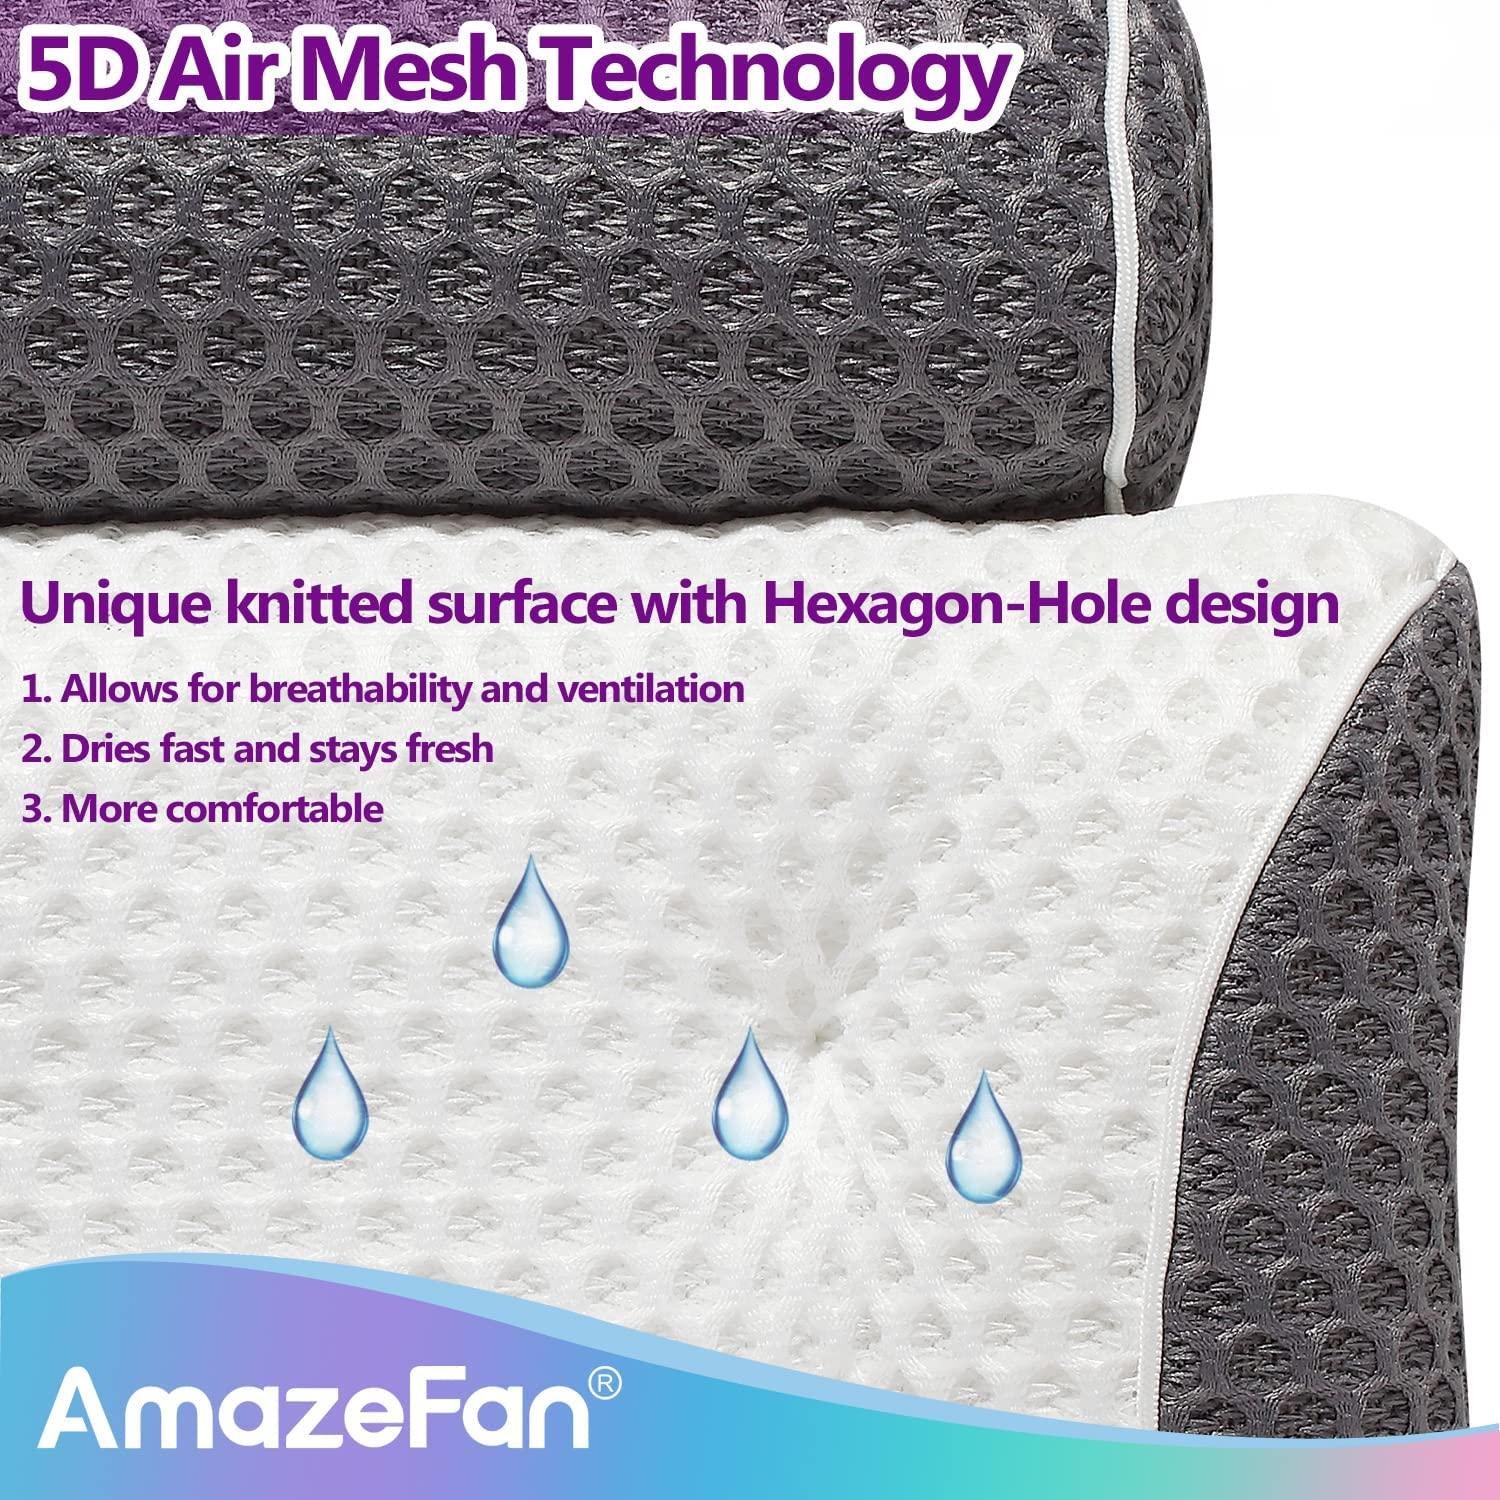 AmazeFan Luxury Bath Pillow, Ergonomic Bathtub Spa Pillow with 4D Air Mesh Technology and 6 Suction Cups, Helps Support Head, Back, Shoulder and Neck, Fits Al